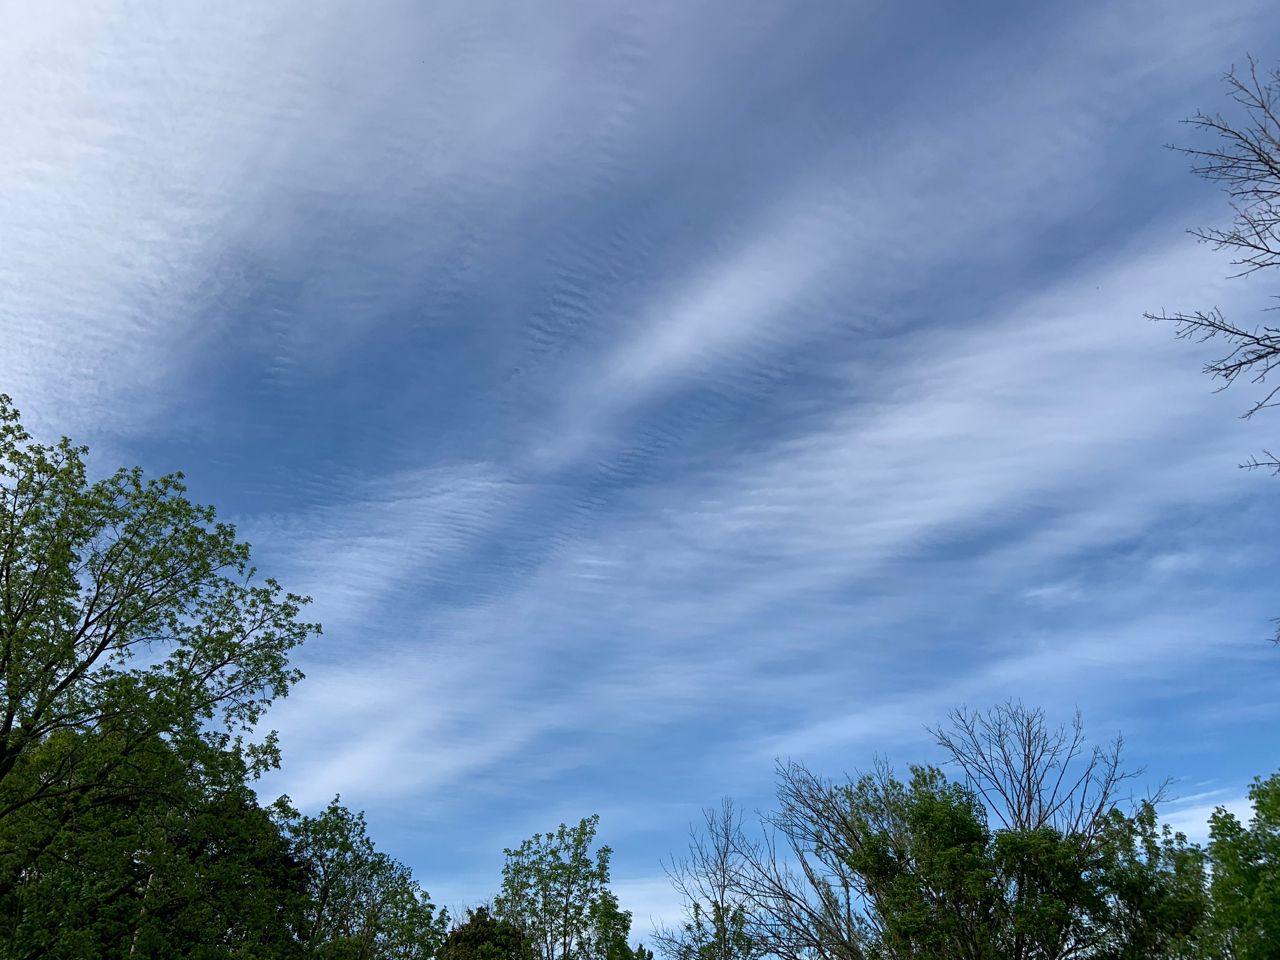 streaks of wrinkled white clouds across a bright blue sky